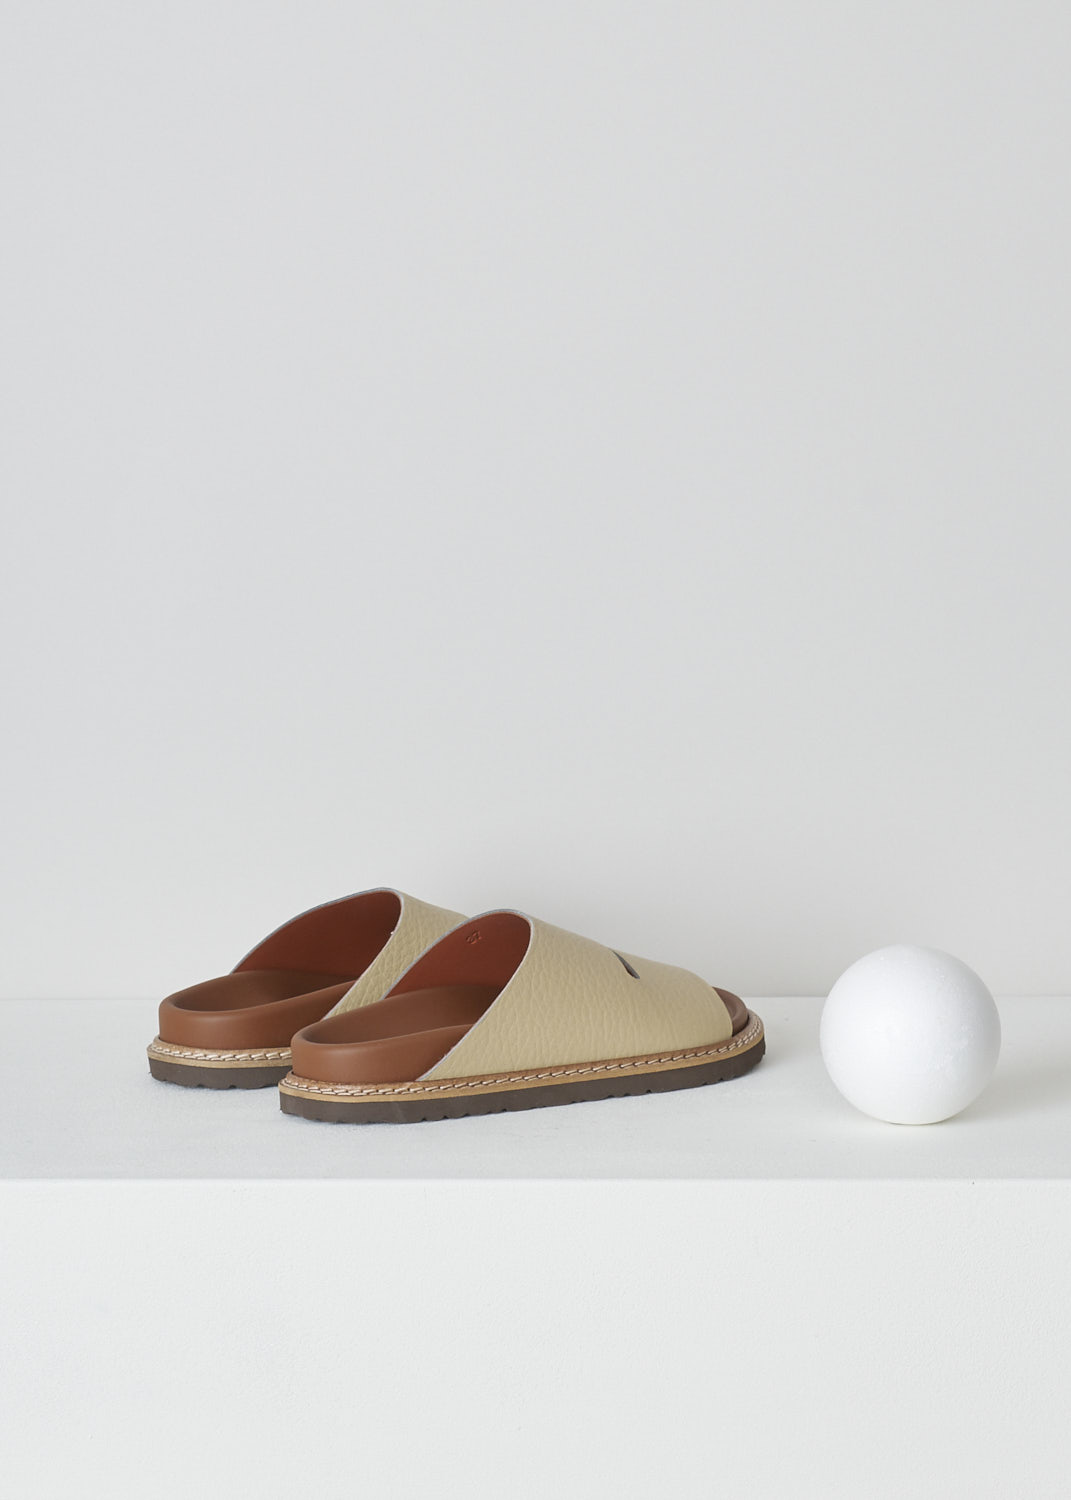 SOFIE, Dâ€™HOORE FABIA SLIP-ON SANDALS IN STONE, FABIA_LNAT_STONE, Beige, Back, These slip-on sandals have a wide footbed with stitching along the soles. A broad strap with a horizontal cut-out goes across the vamp. These sandals have a round open-toe.
